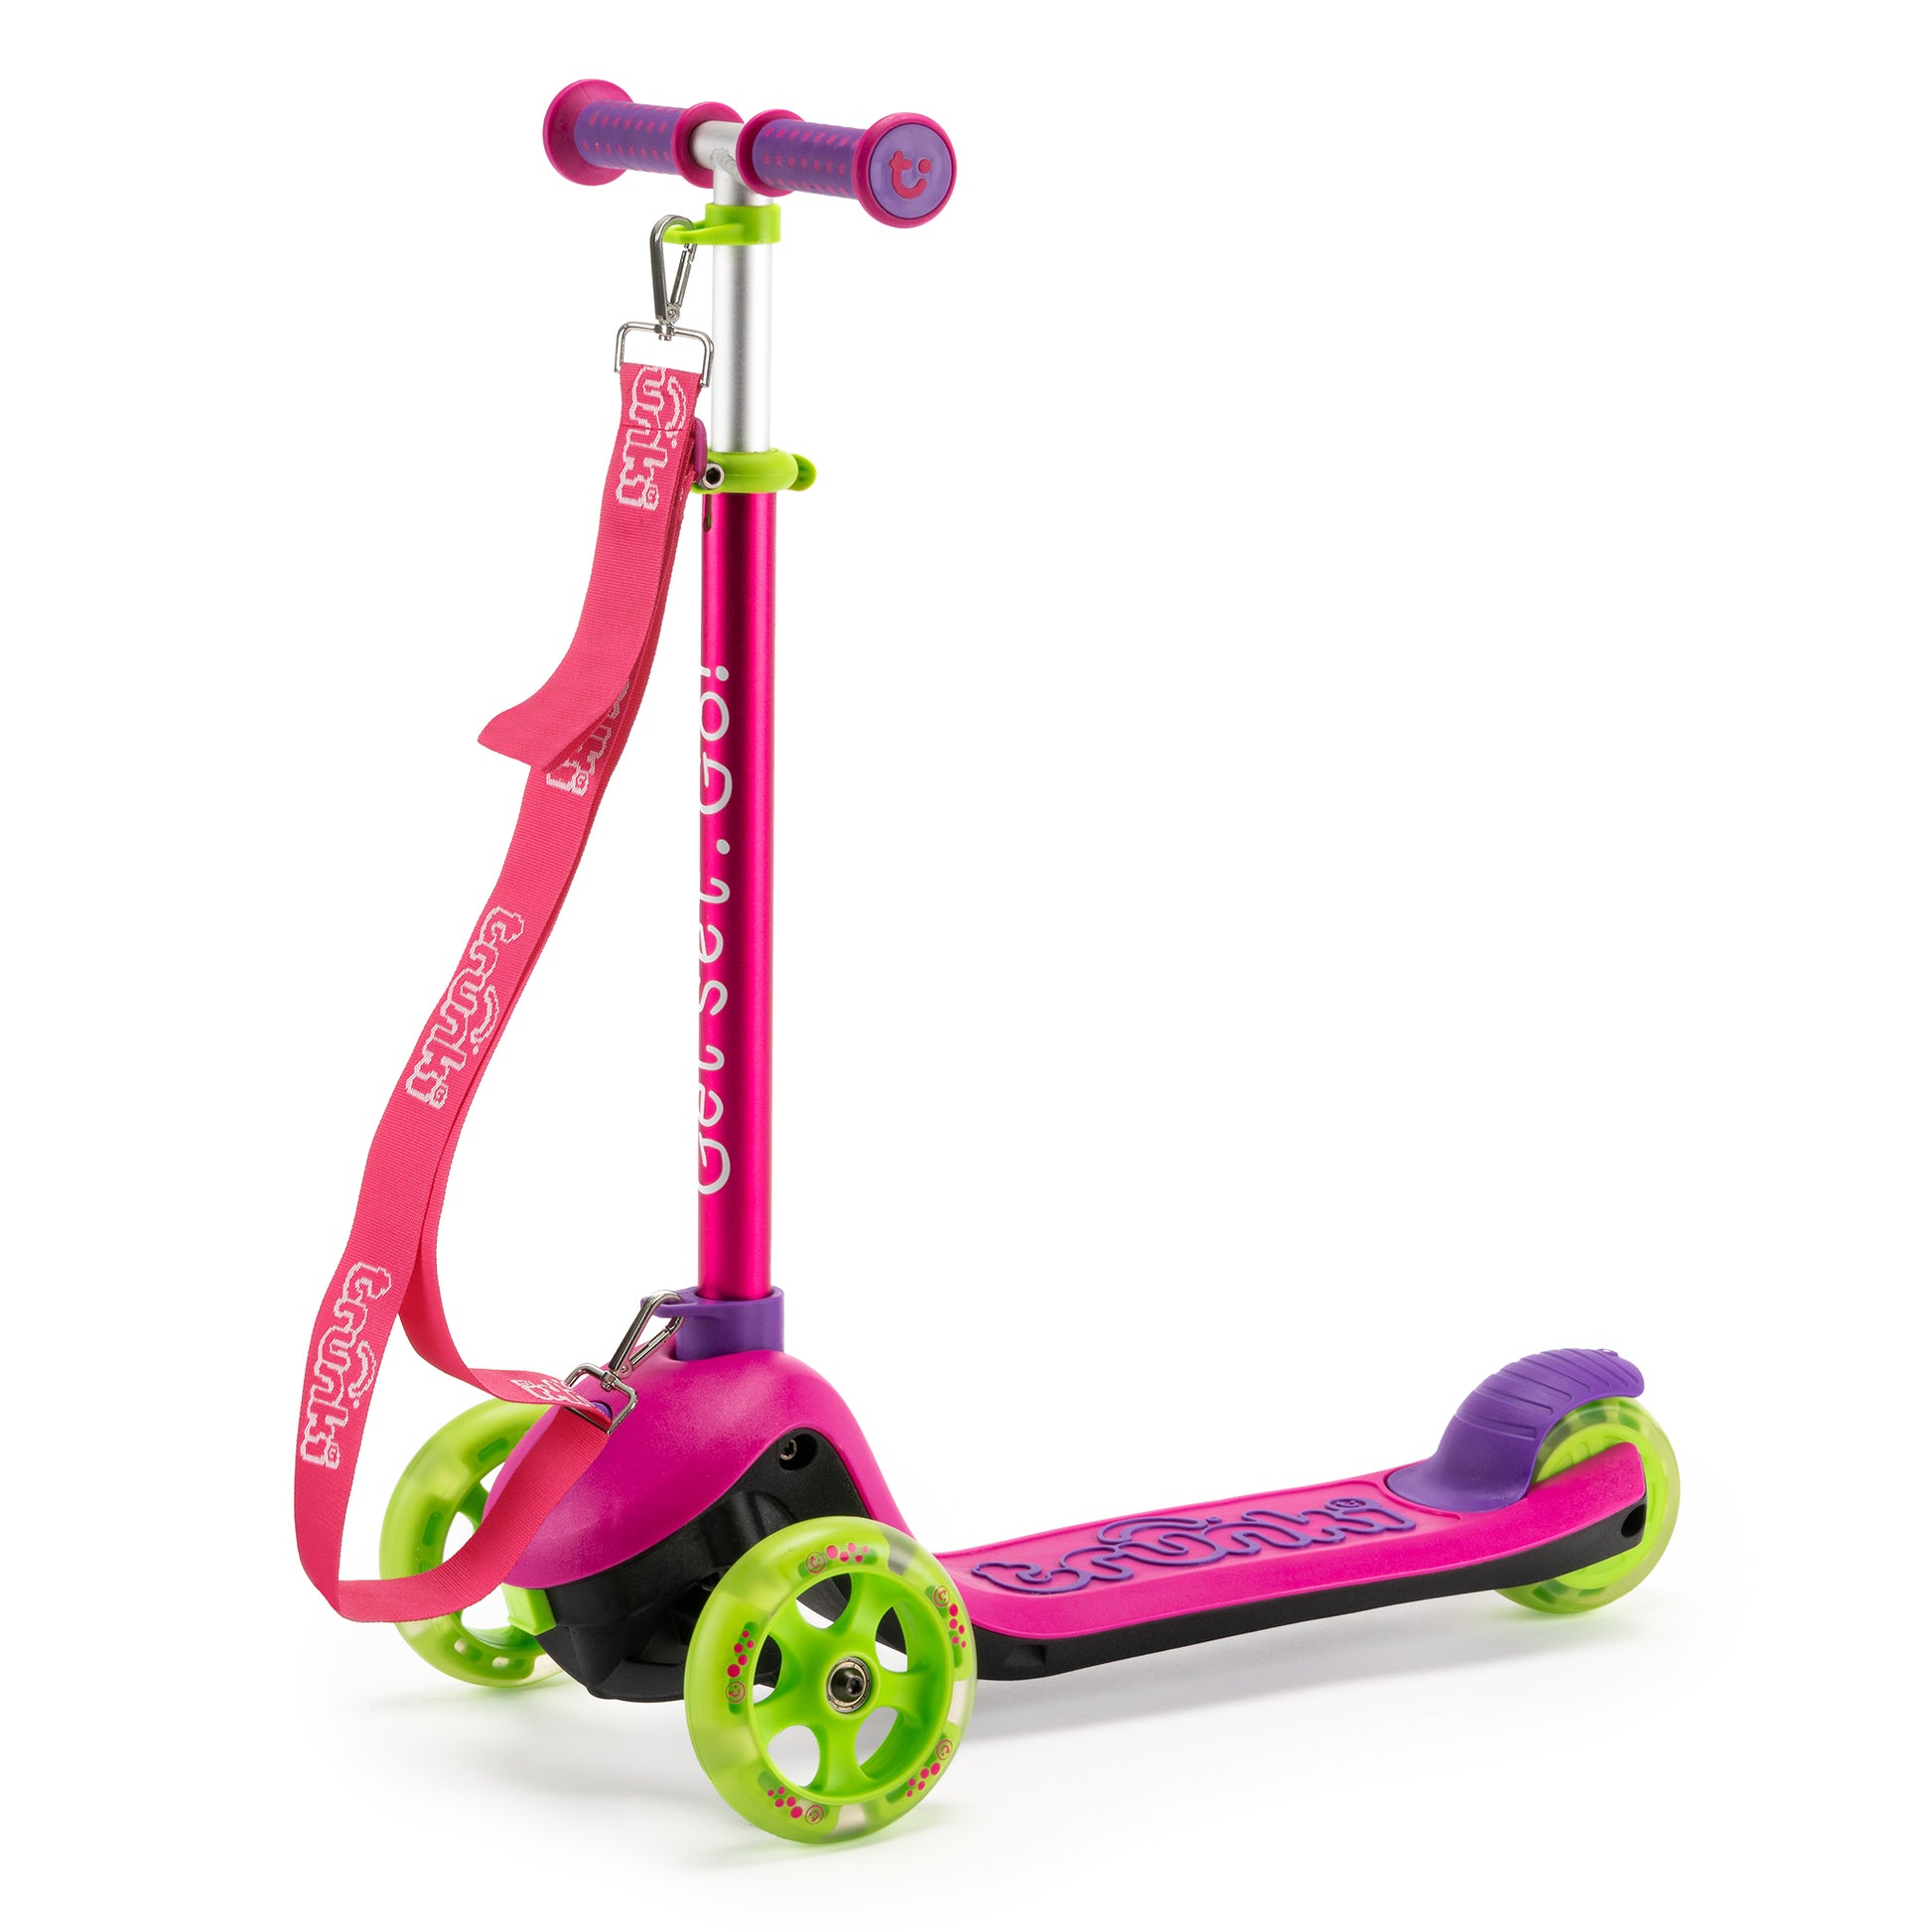 Trunki-Folding-Scooter-Small-Pink-Image1